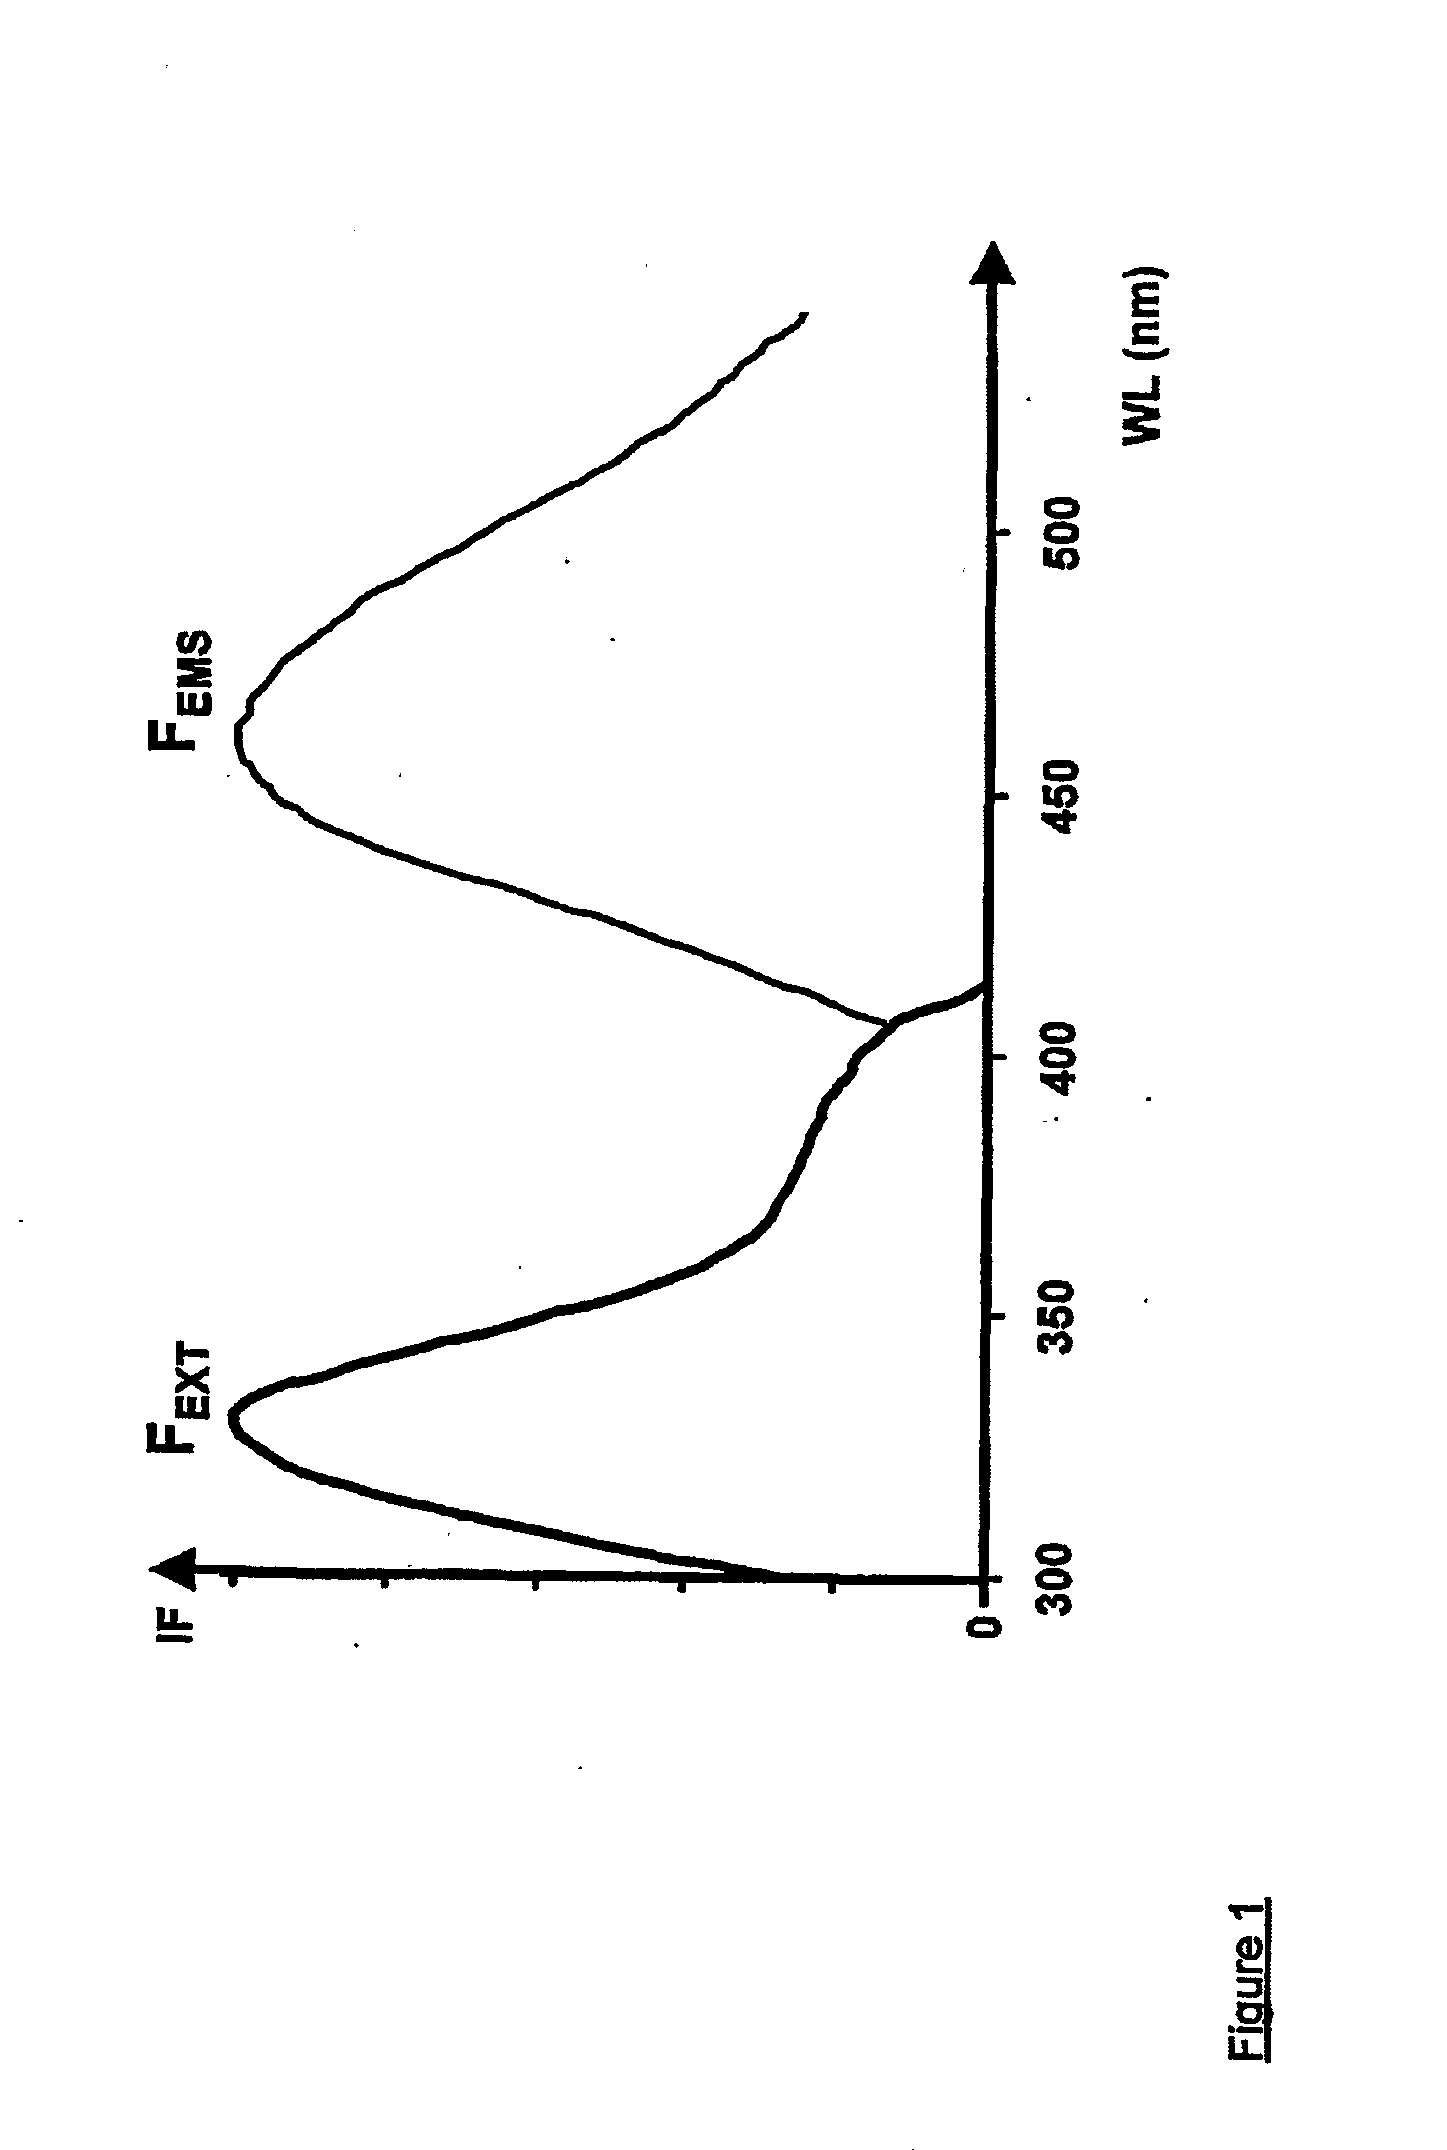 Apparatus and Method for Monitoring Tissue Vitality Parameters